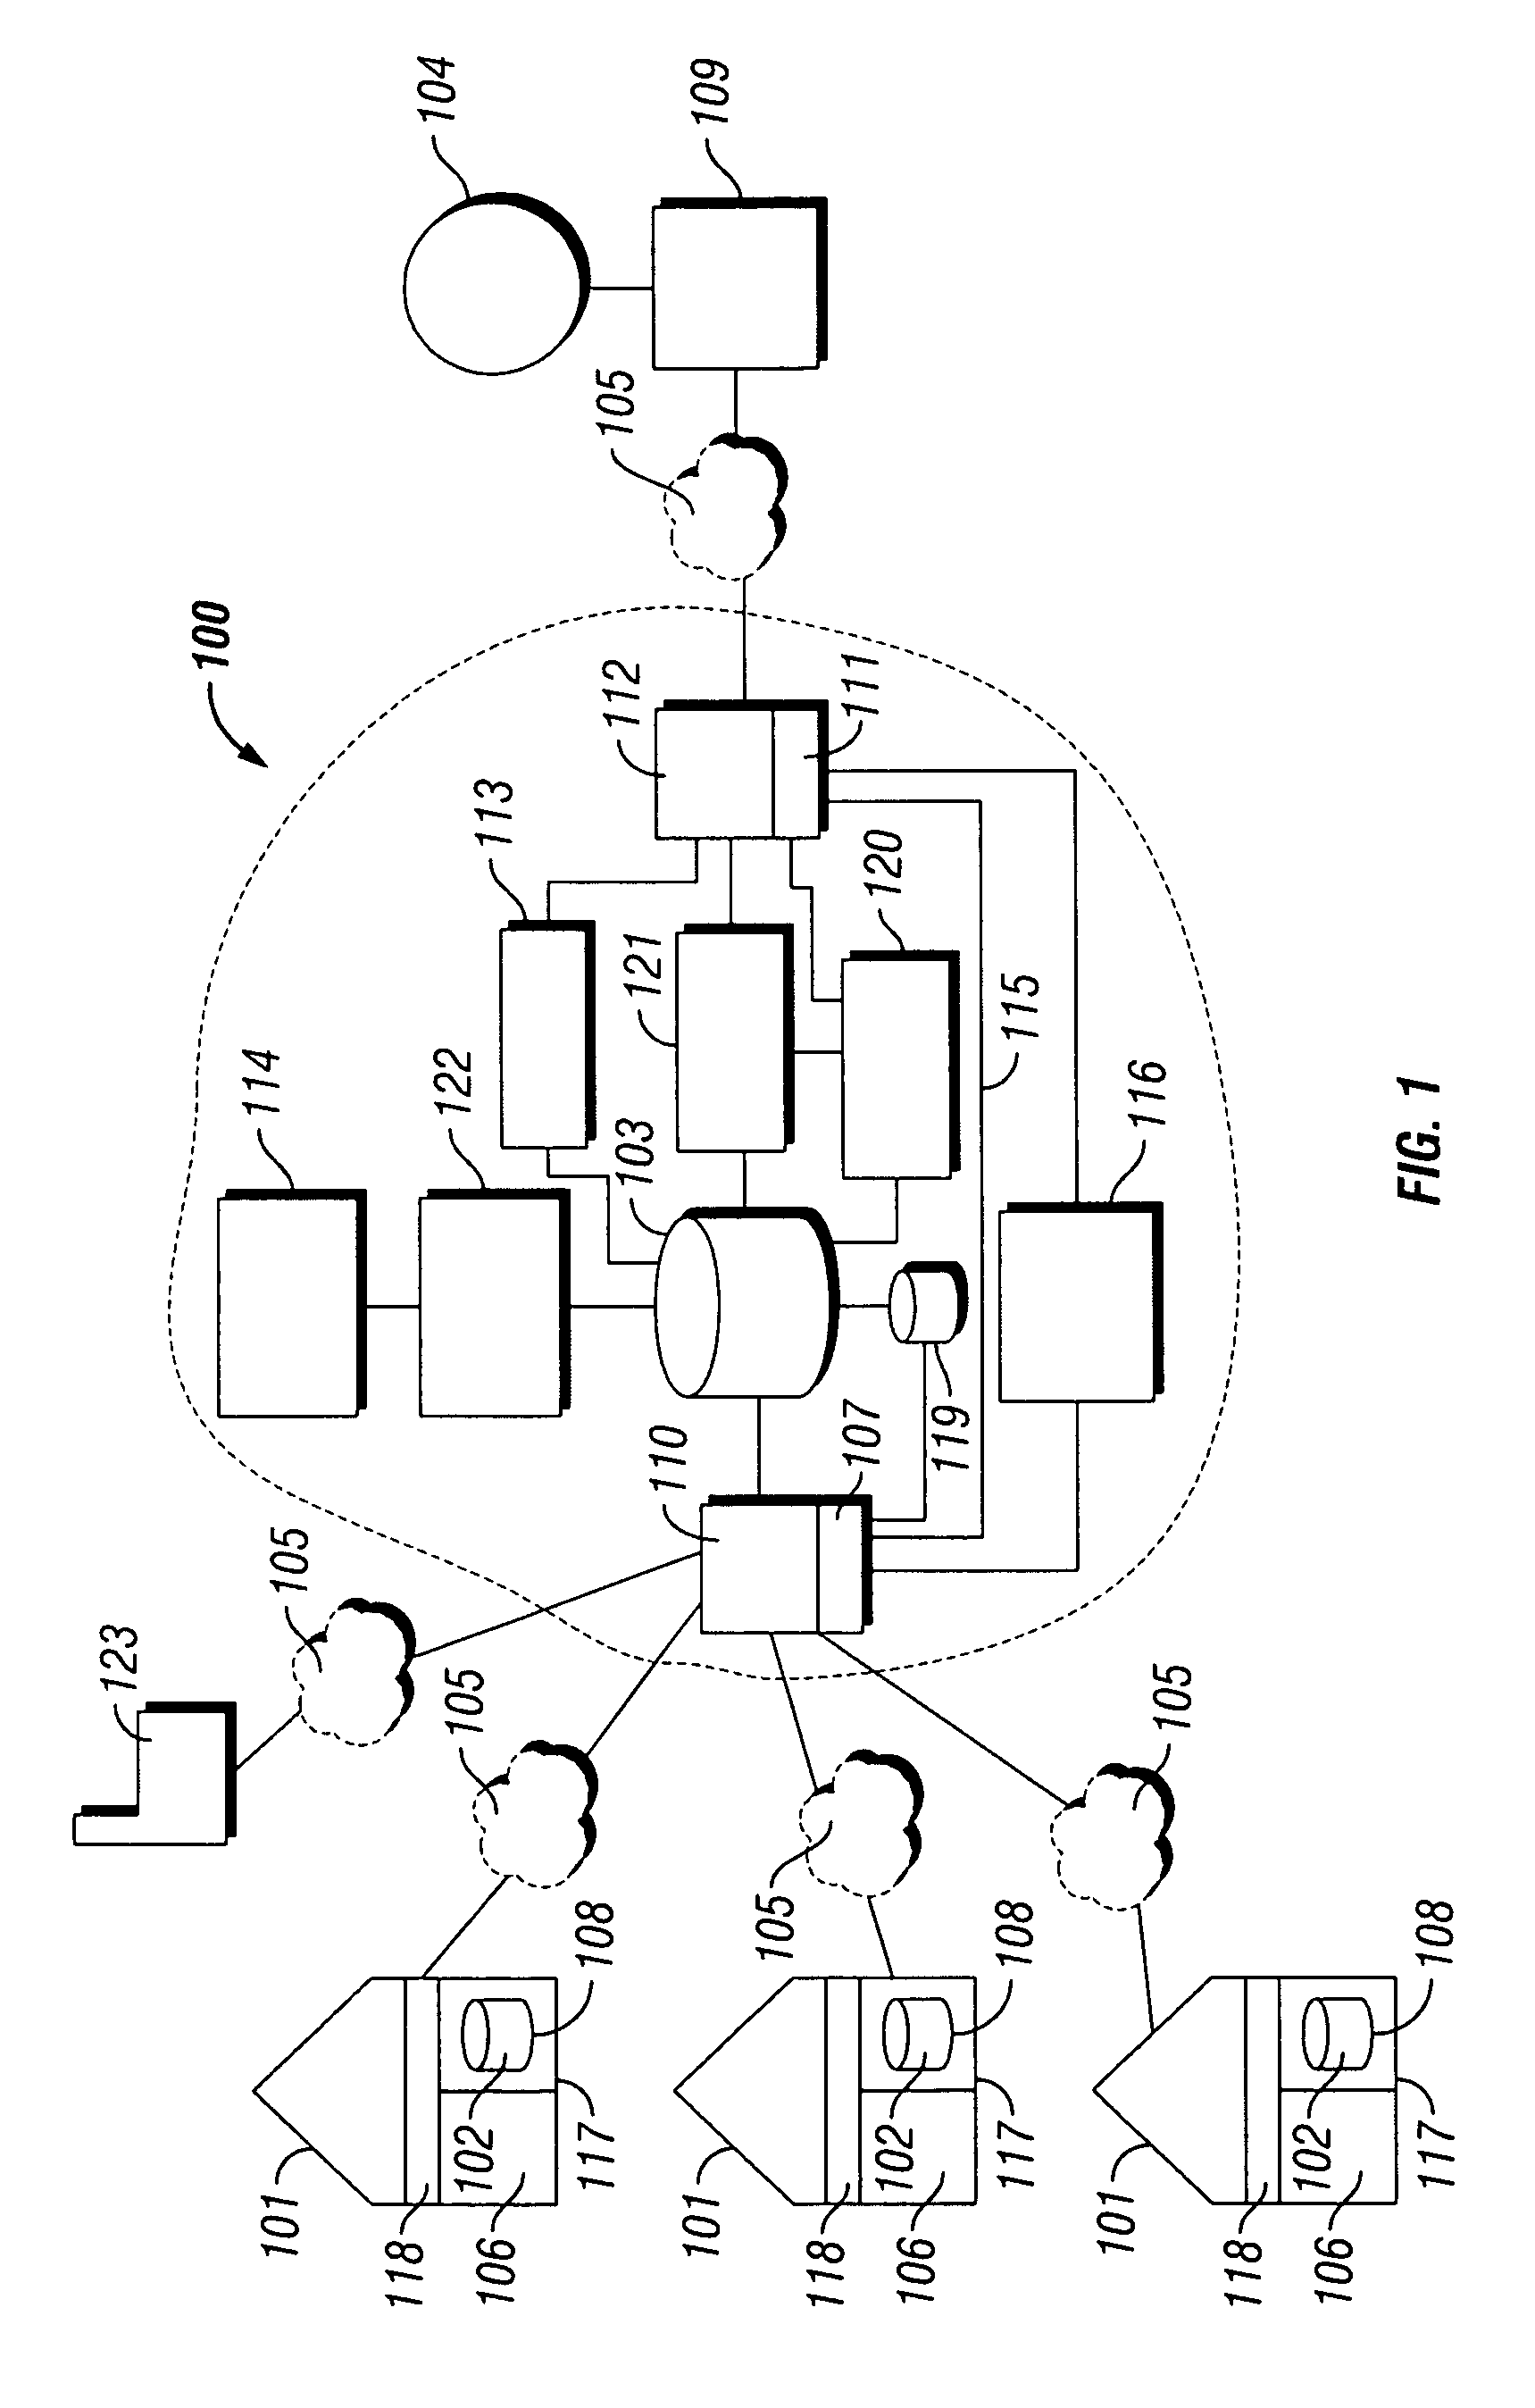 Internet enhanced local shopping system and method